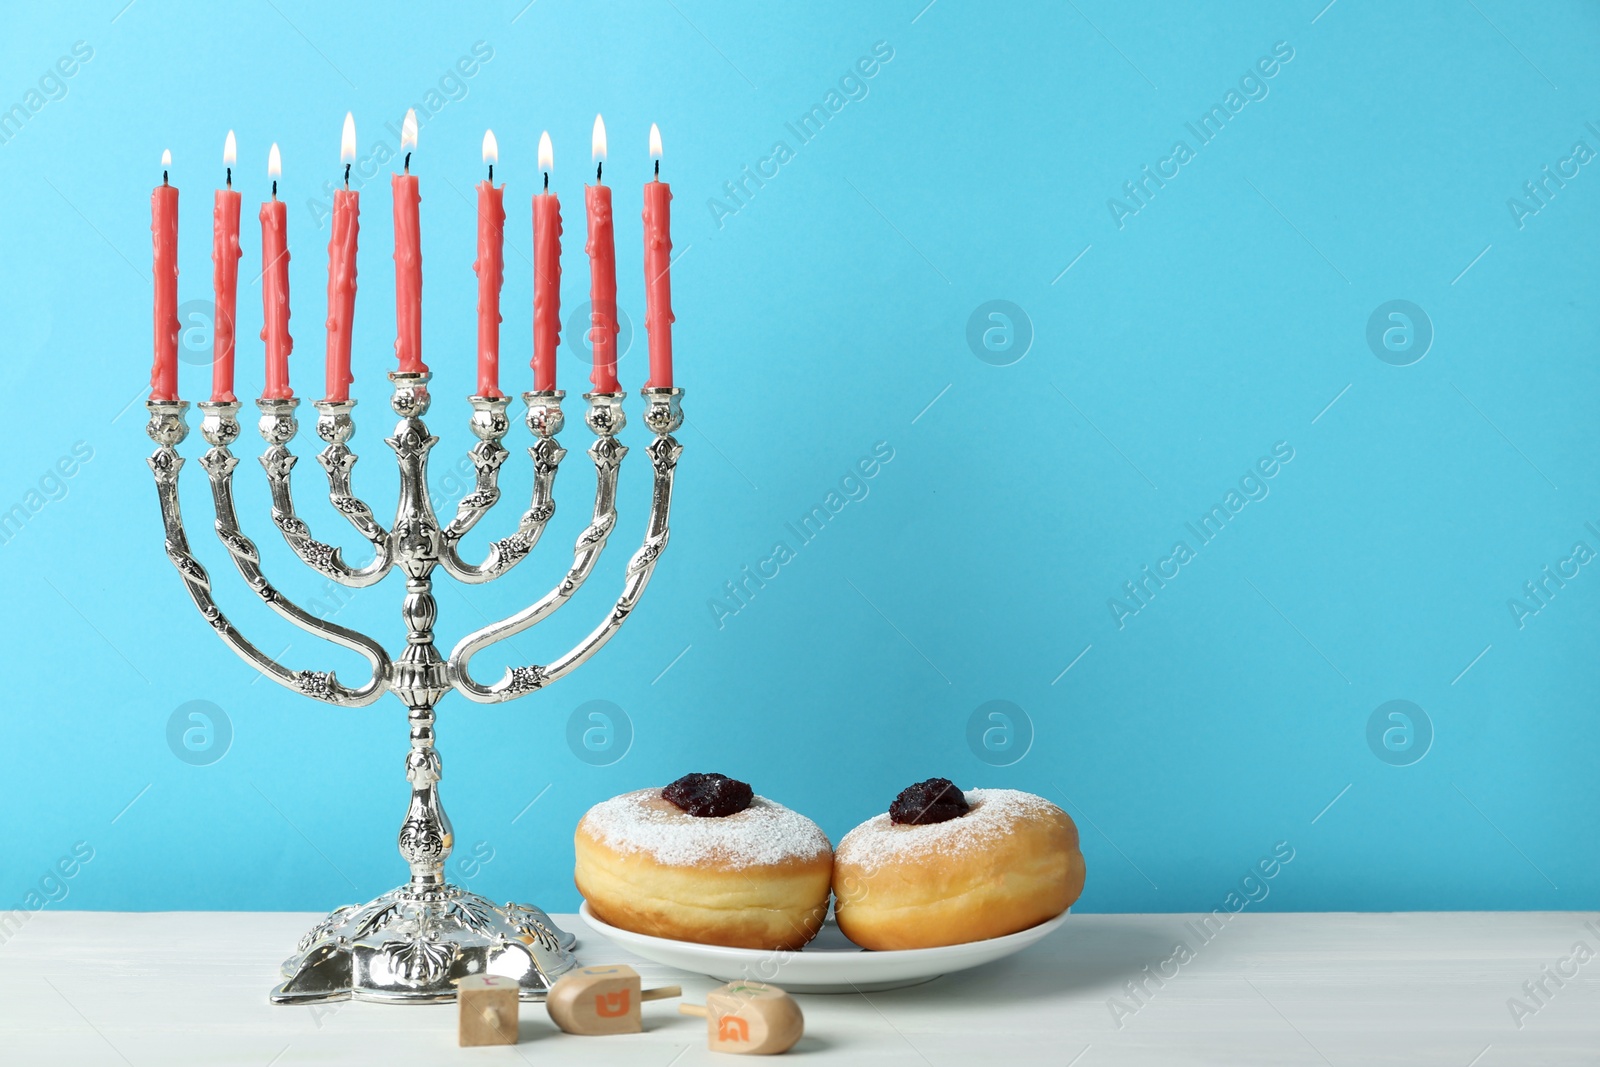 Photo of Silver menorah, dreidels with He, Pe, Nun, Gimel letters and sufganiyot on white table, space for text. Hanukkah symbols